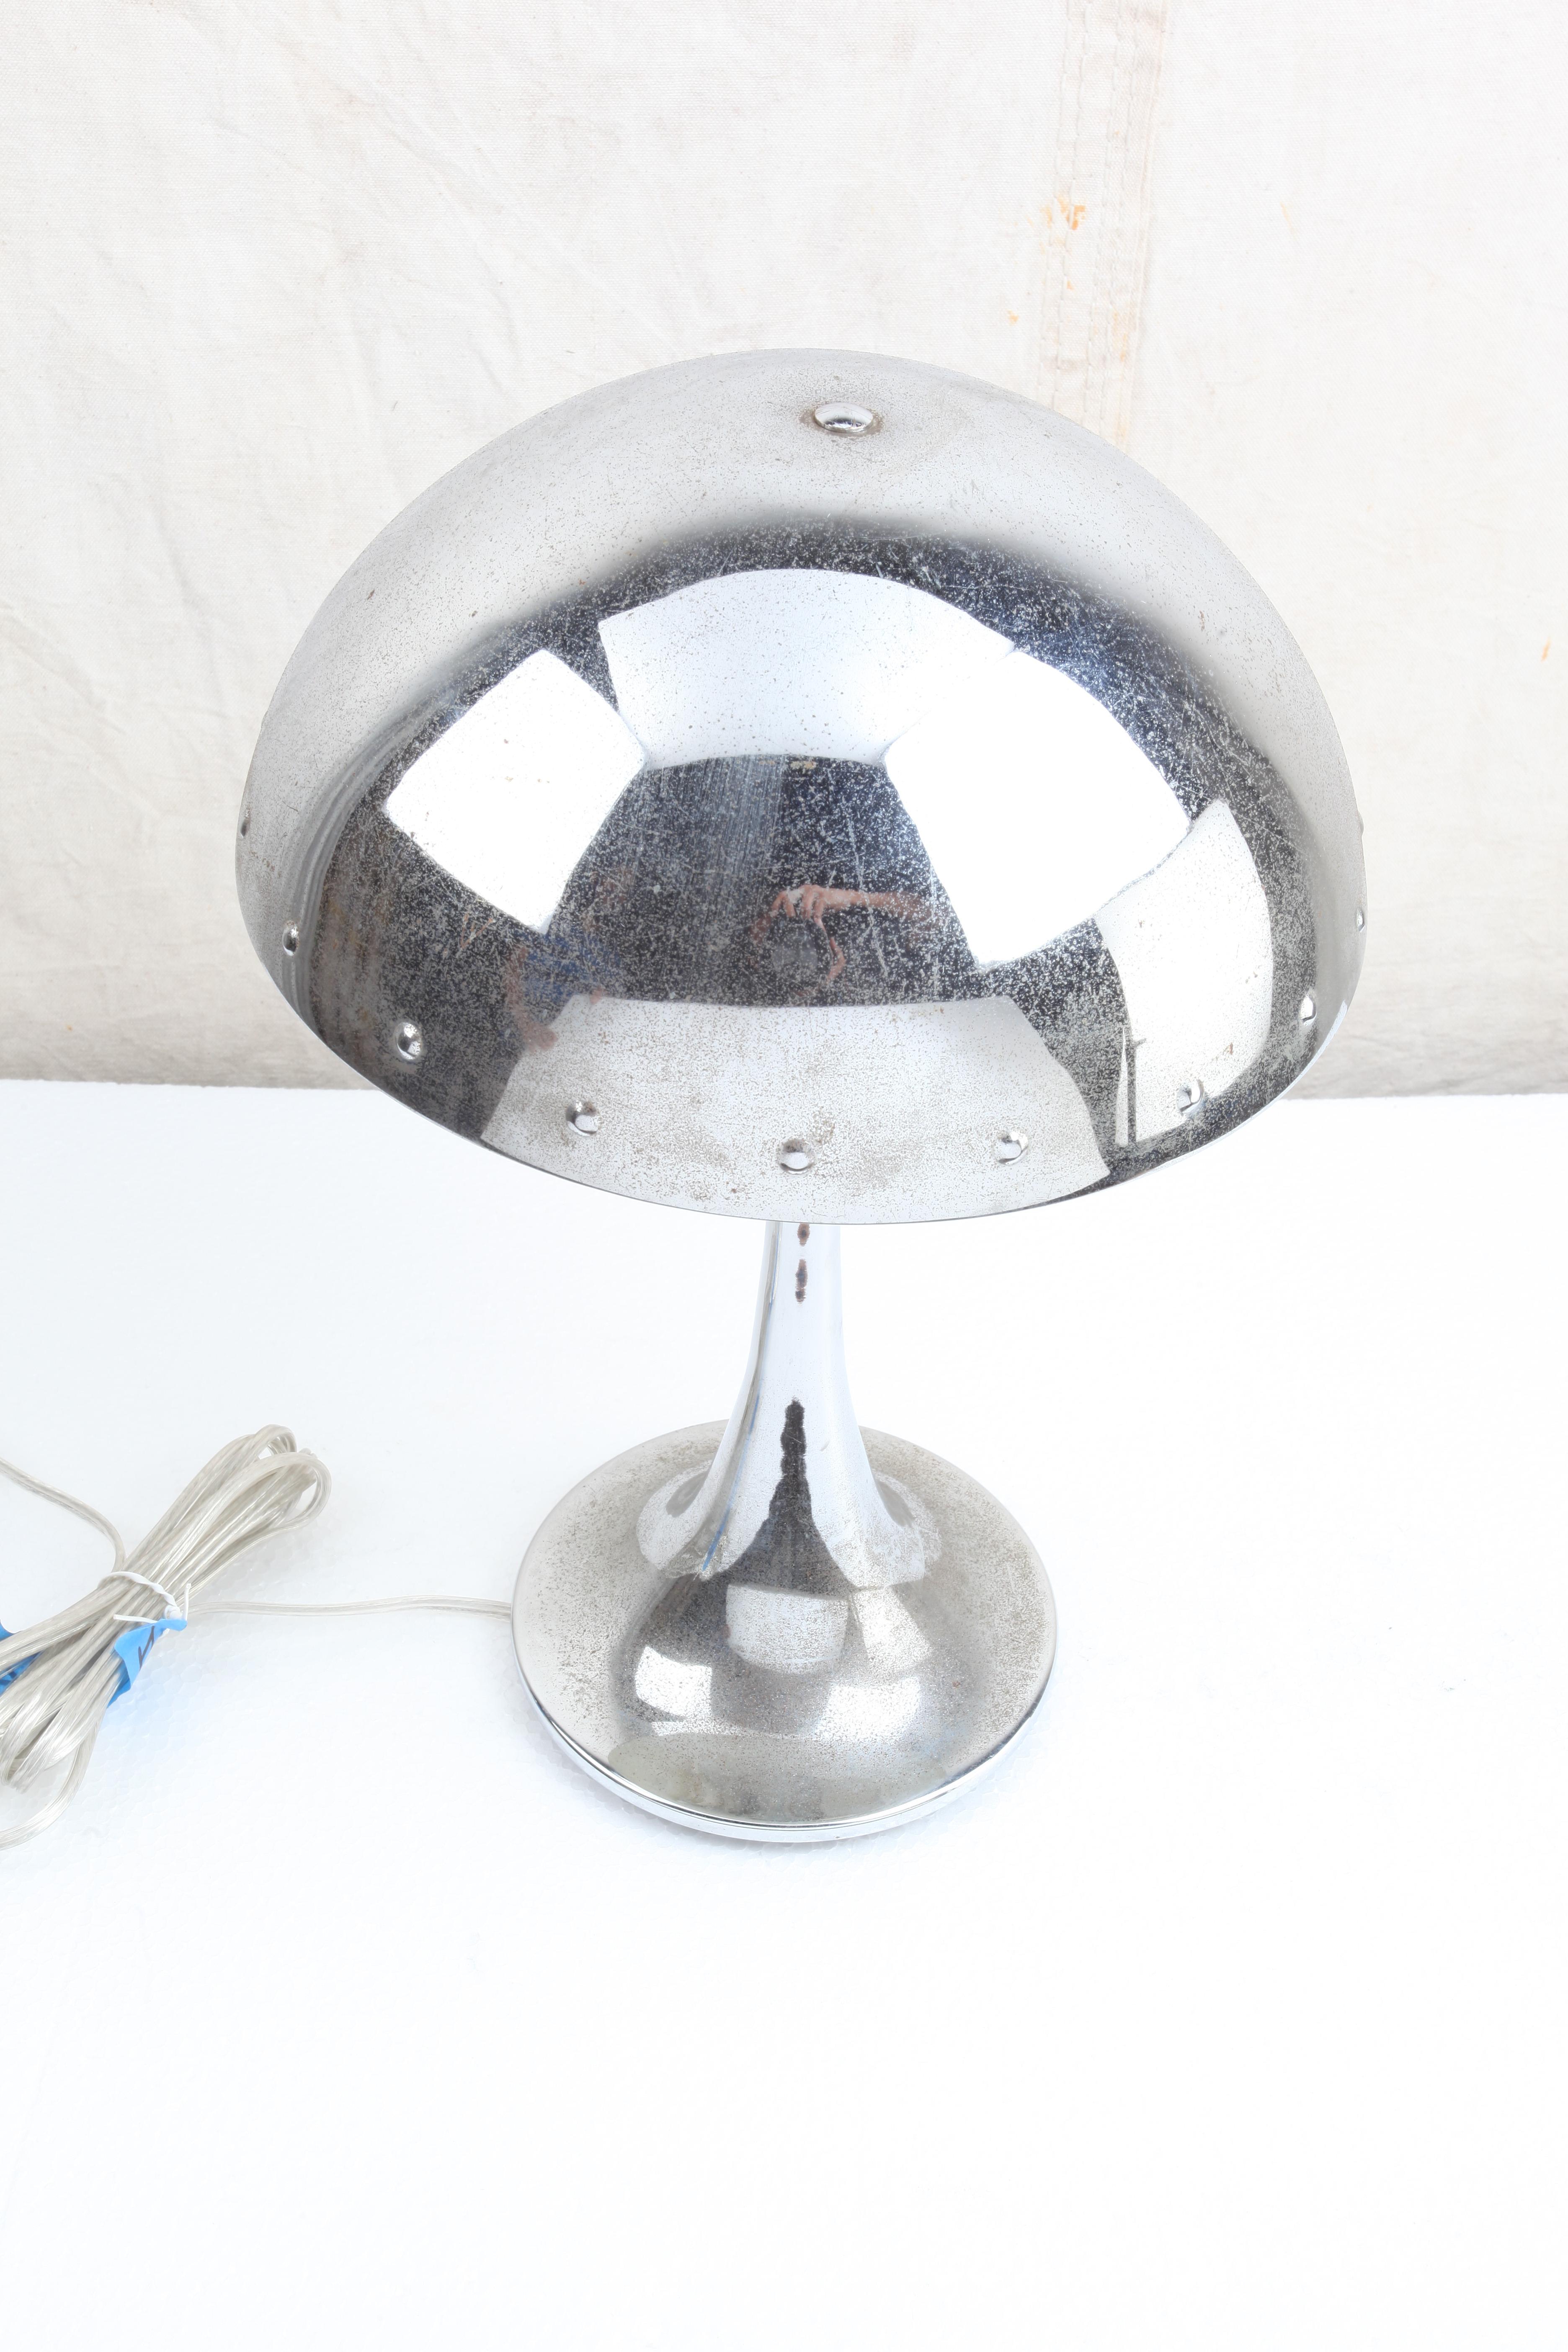 A mushroom-shaped chrome table lamp with rivets along the edge of the shade. Nice tapered base. Takes a standard base light bulb. European but rewired for American use.